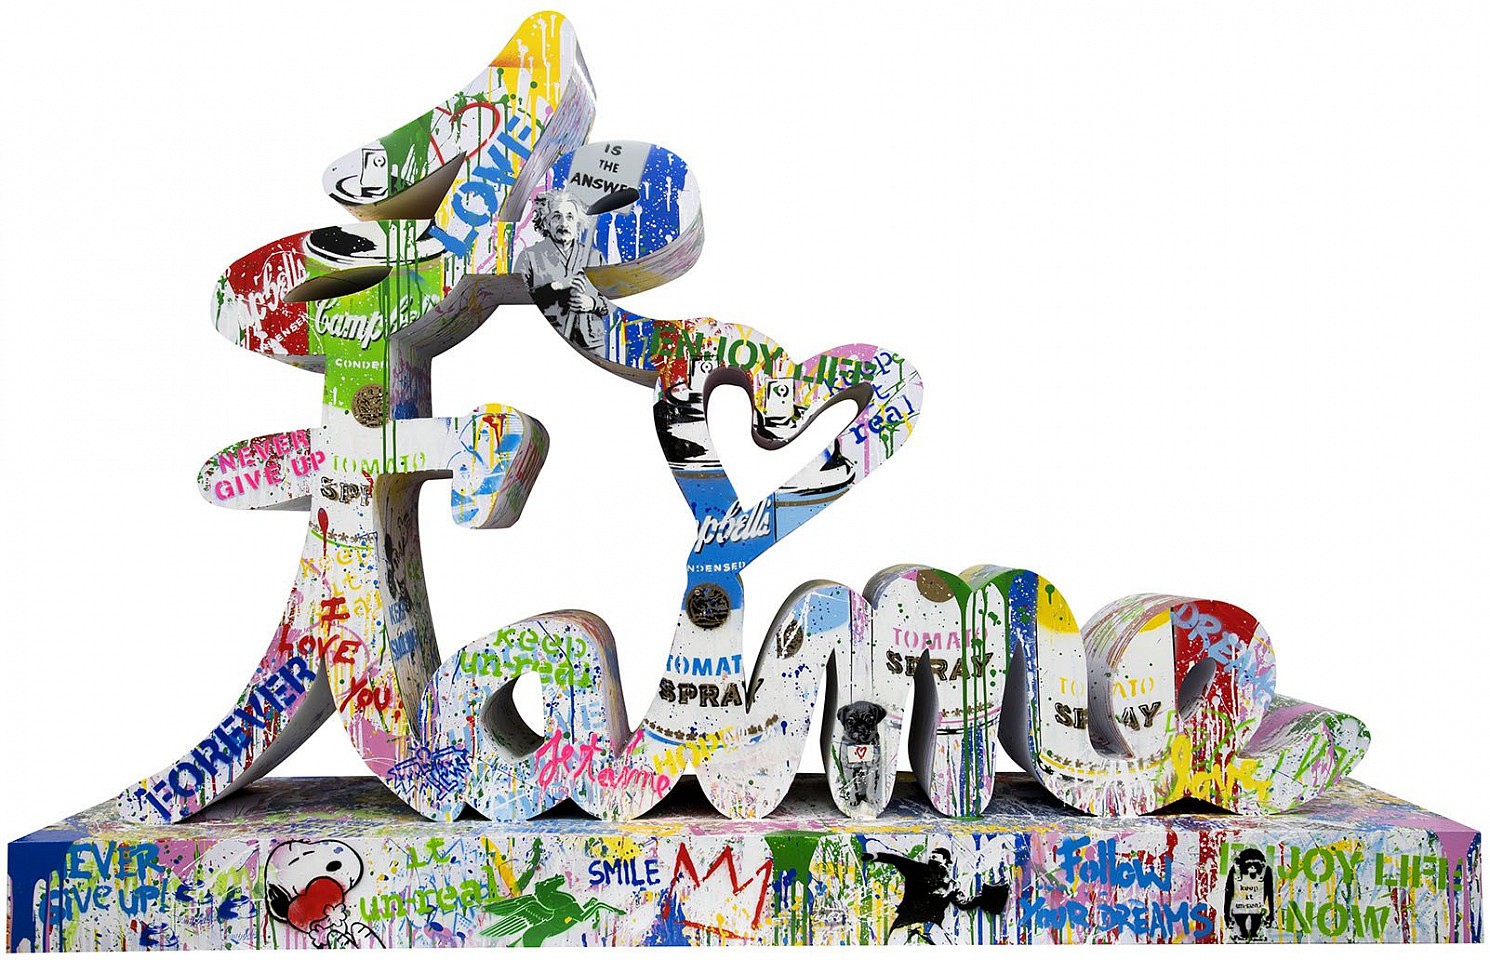 Mr. Brainwash, Je T'aime, 2022
Stencil and Mixed Media on Steel Sculpture, 53 x 80 x 20 in.